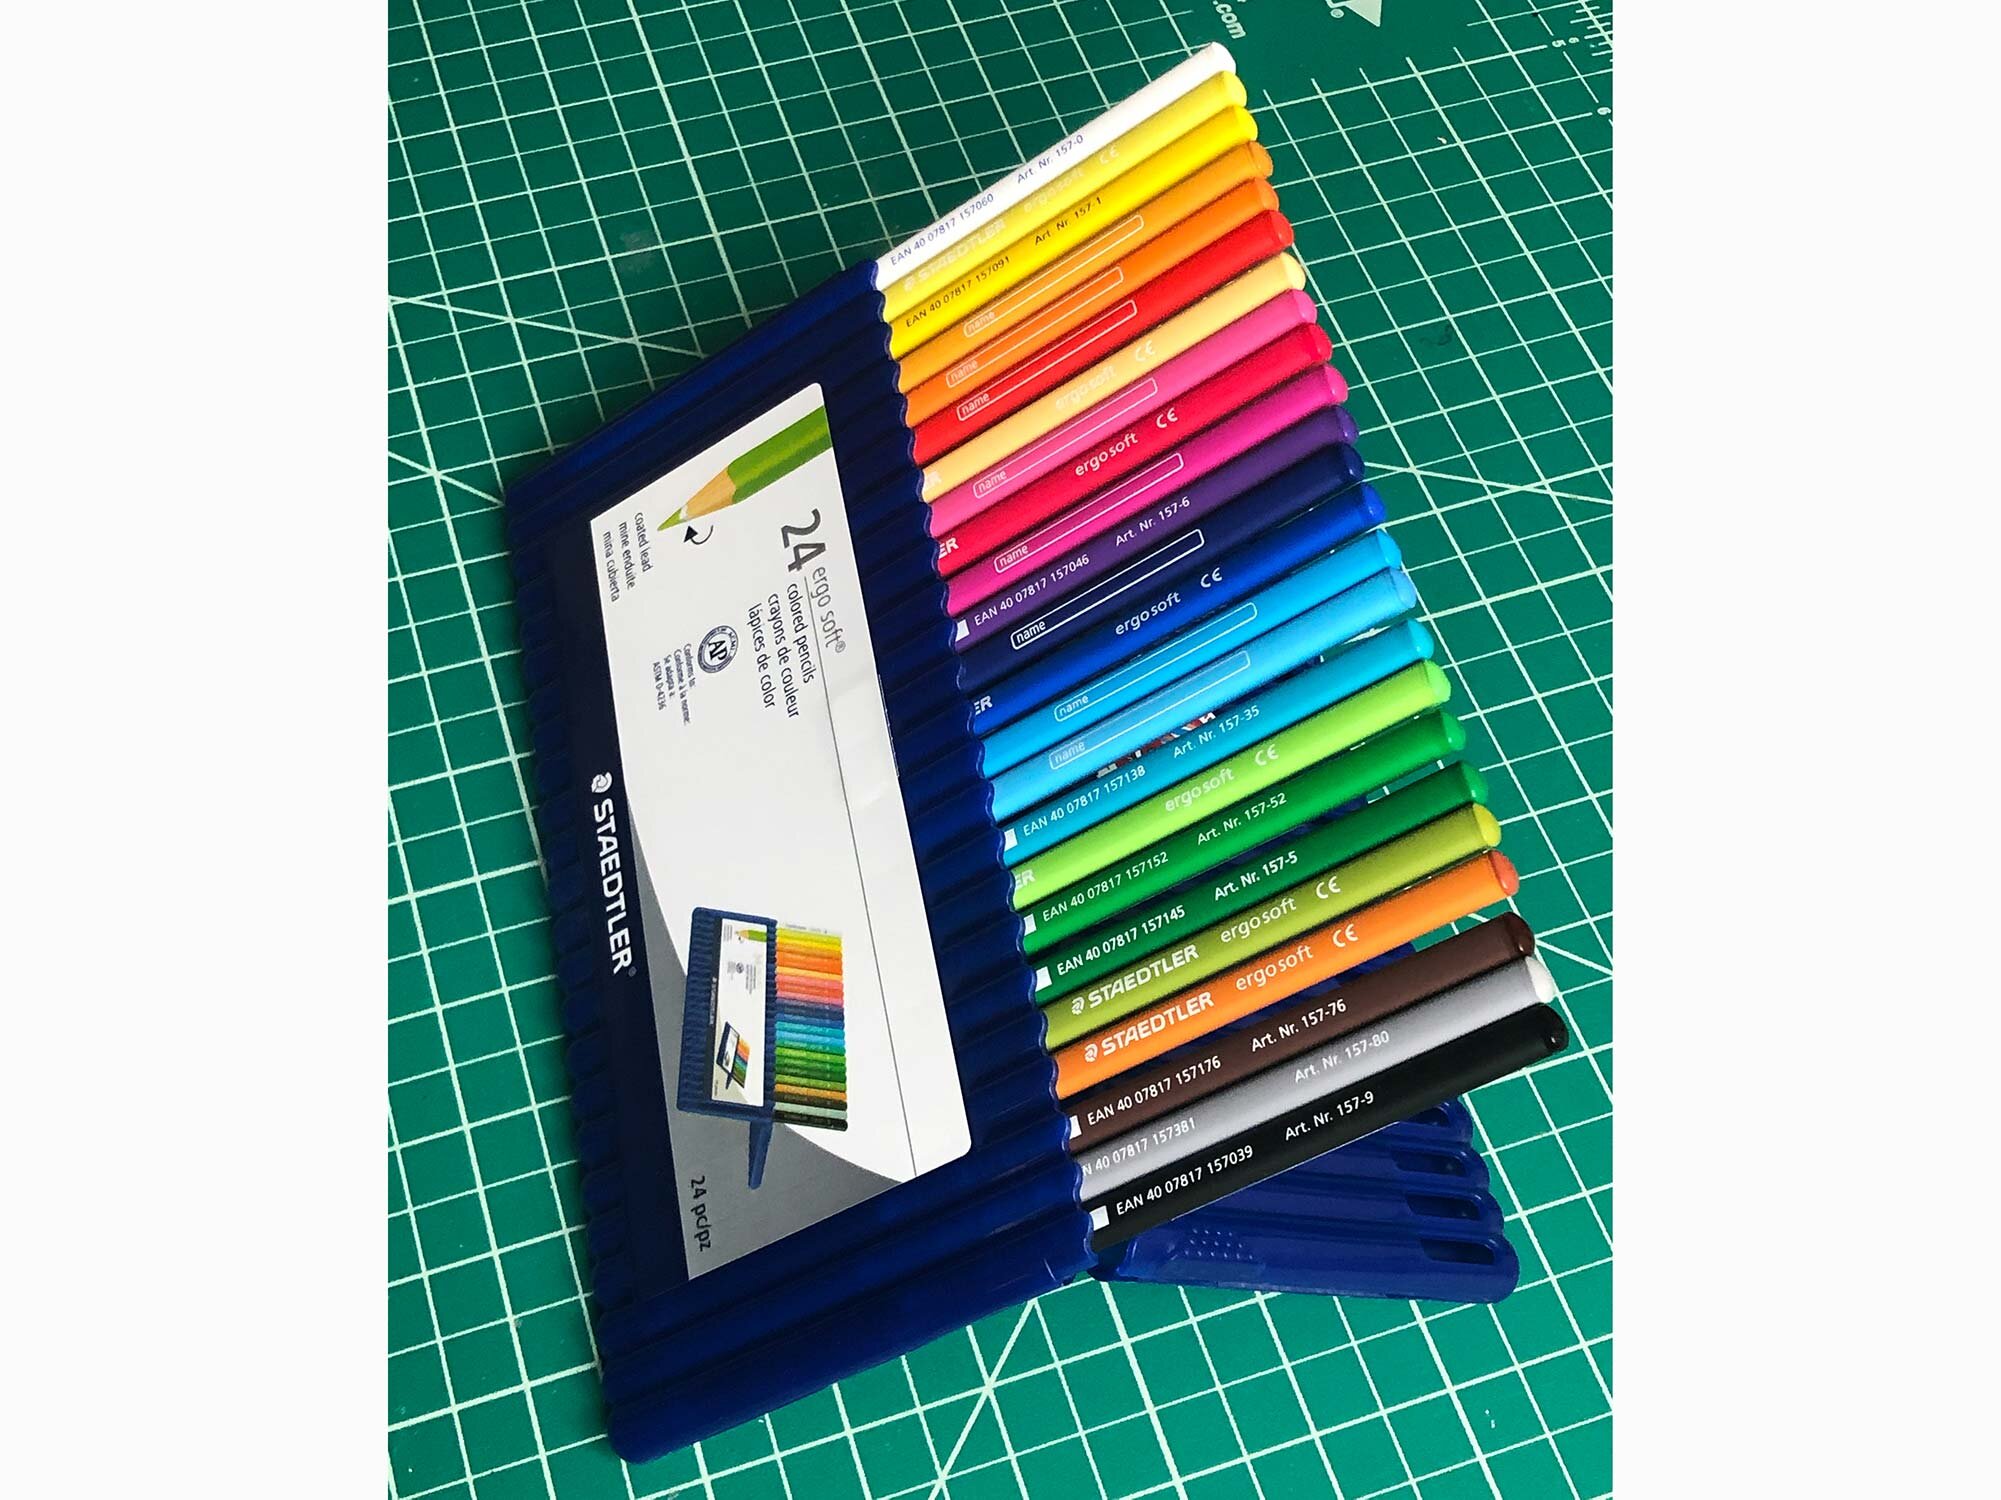 Staedtler Ergosoft plastic case coverts into a stand-up easel